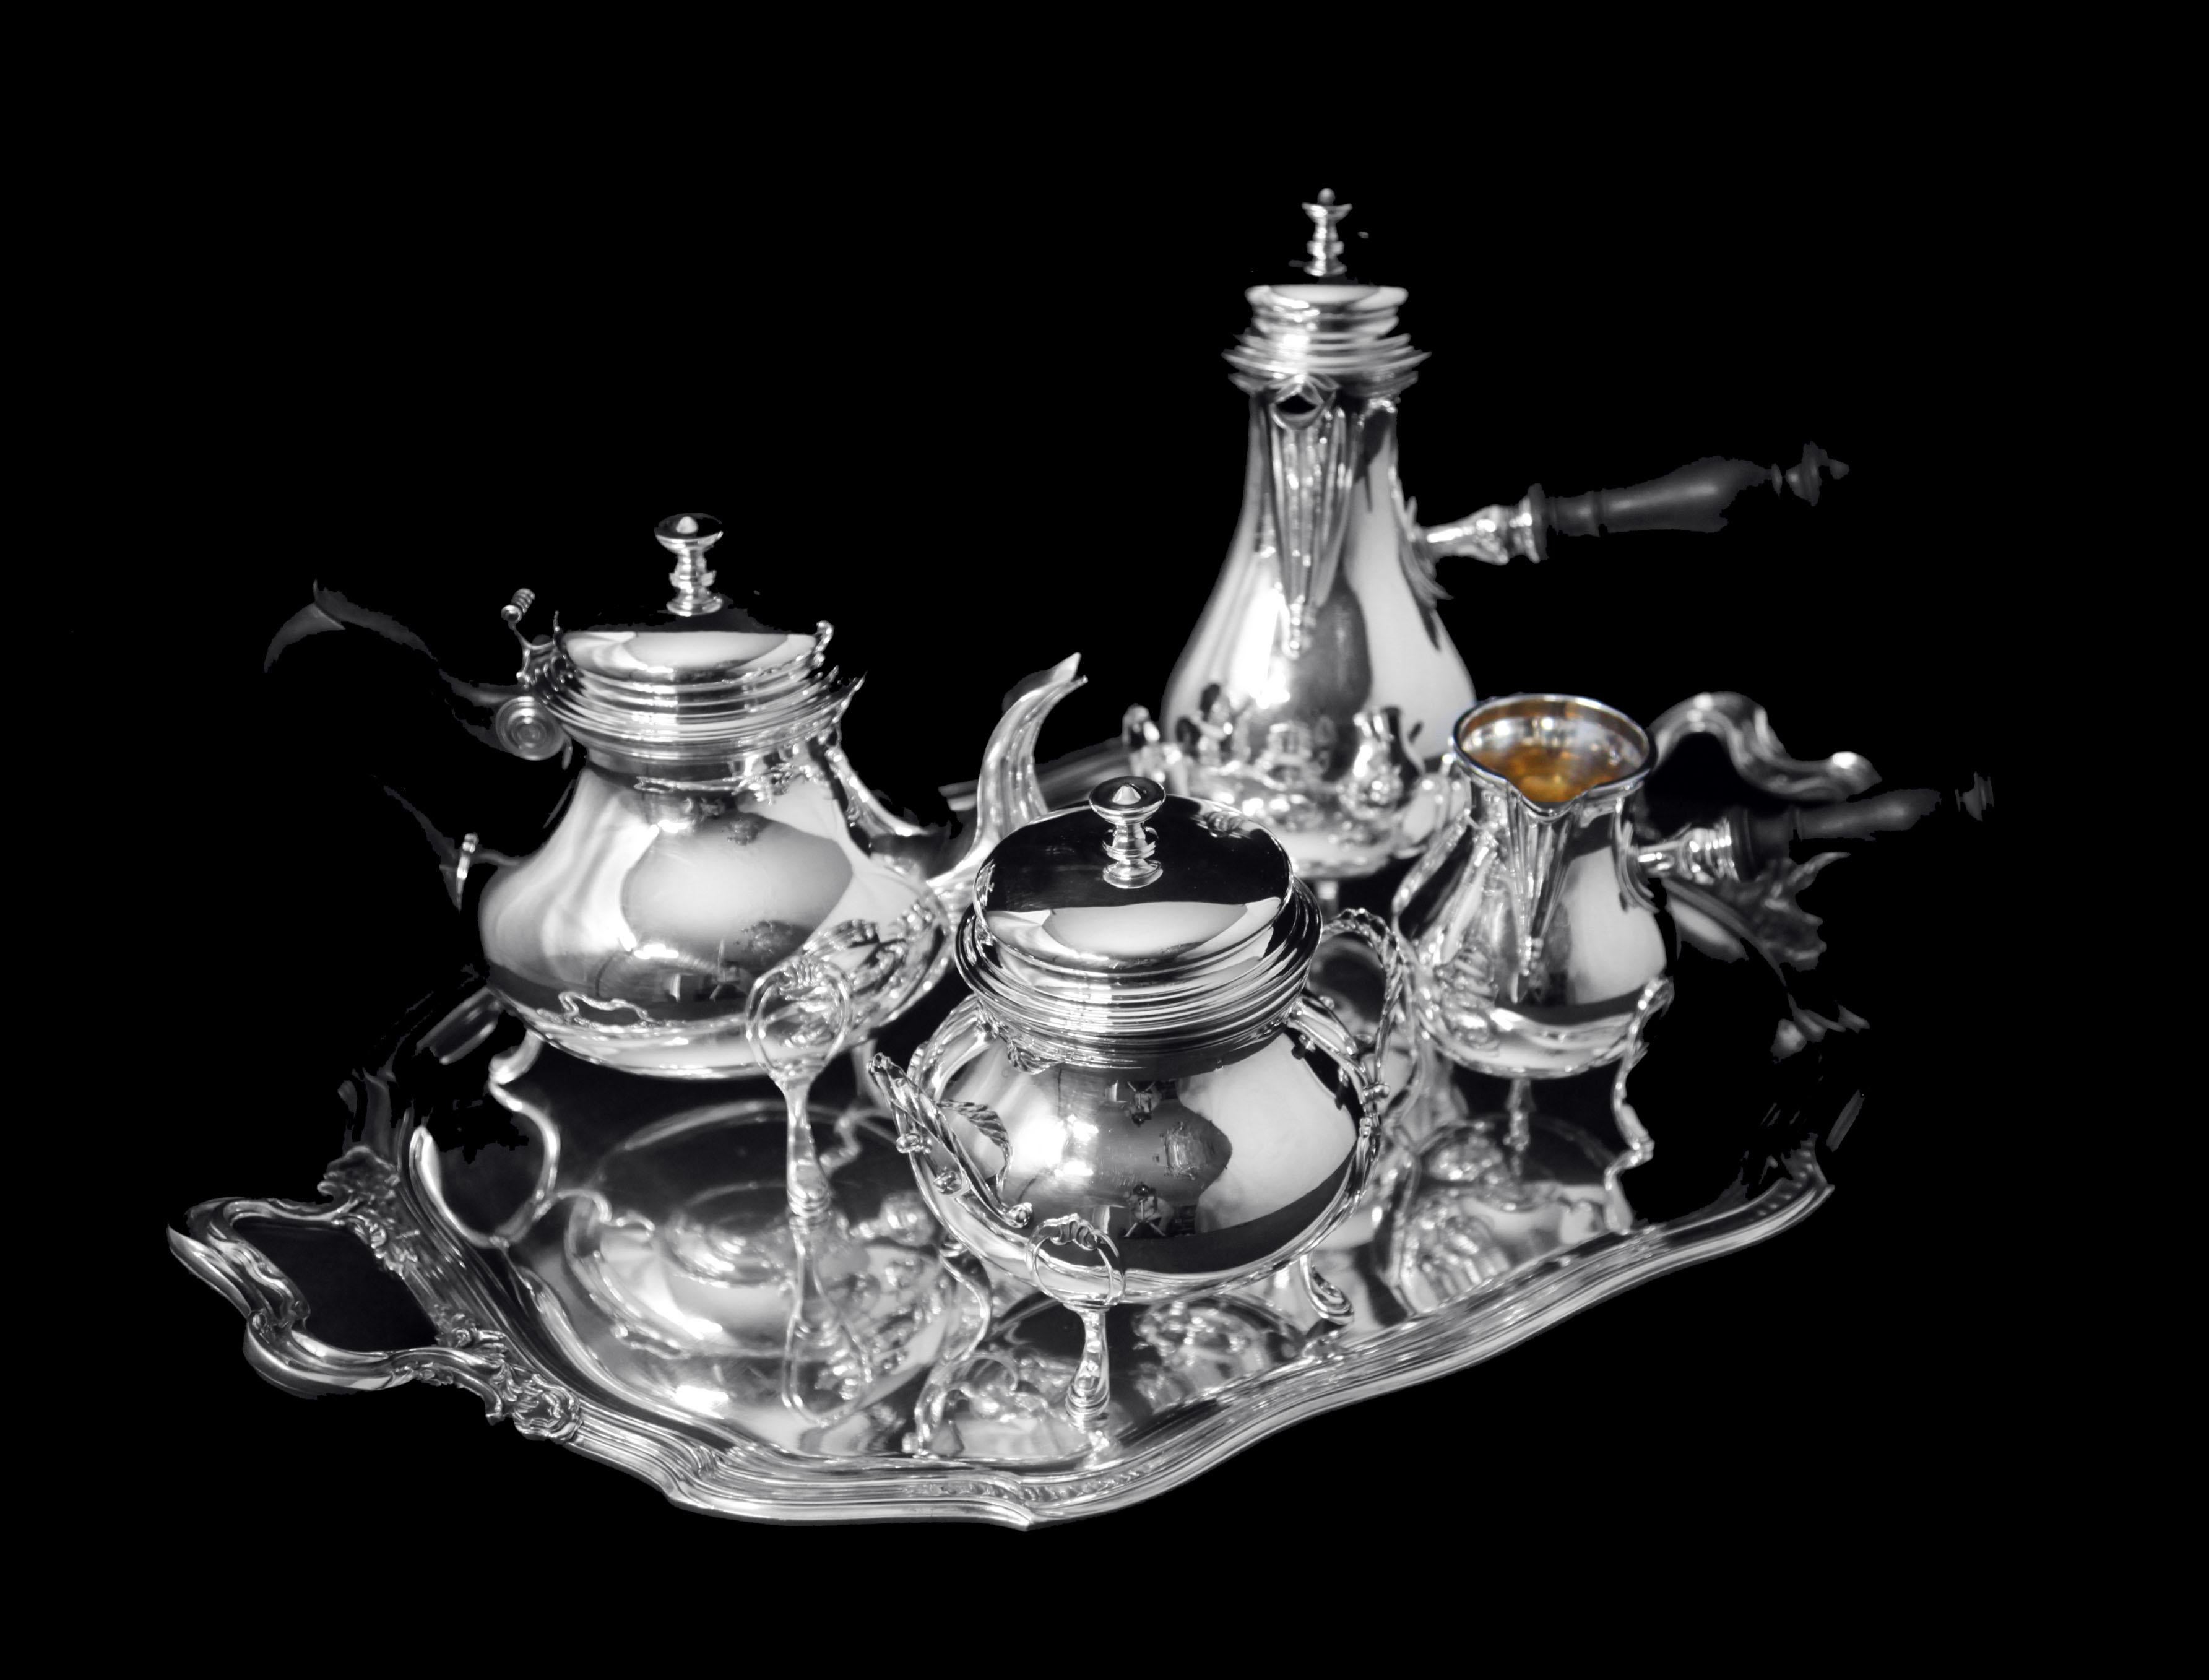 Direct from a Private Mansion in Paris, a Magnificent 4pc. Antique French 950 Sterling Silver and Vermeil Tea Set by France's Premier French Silversmith Jean-Baptiste Odiot and an accompanying 950 sterling silver serving tray by French silversmith